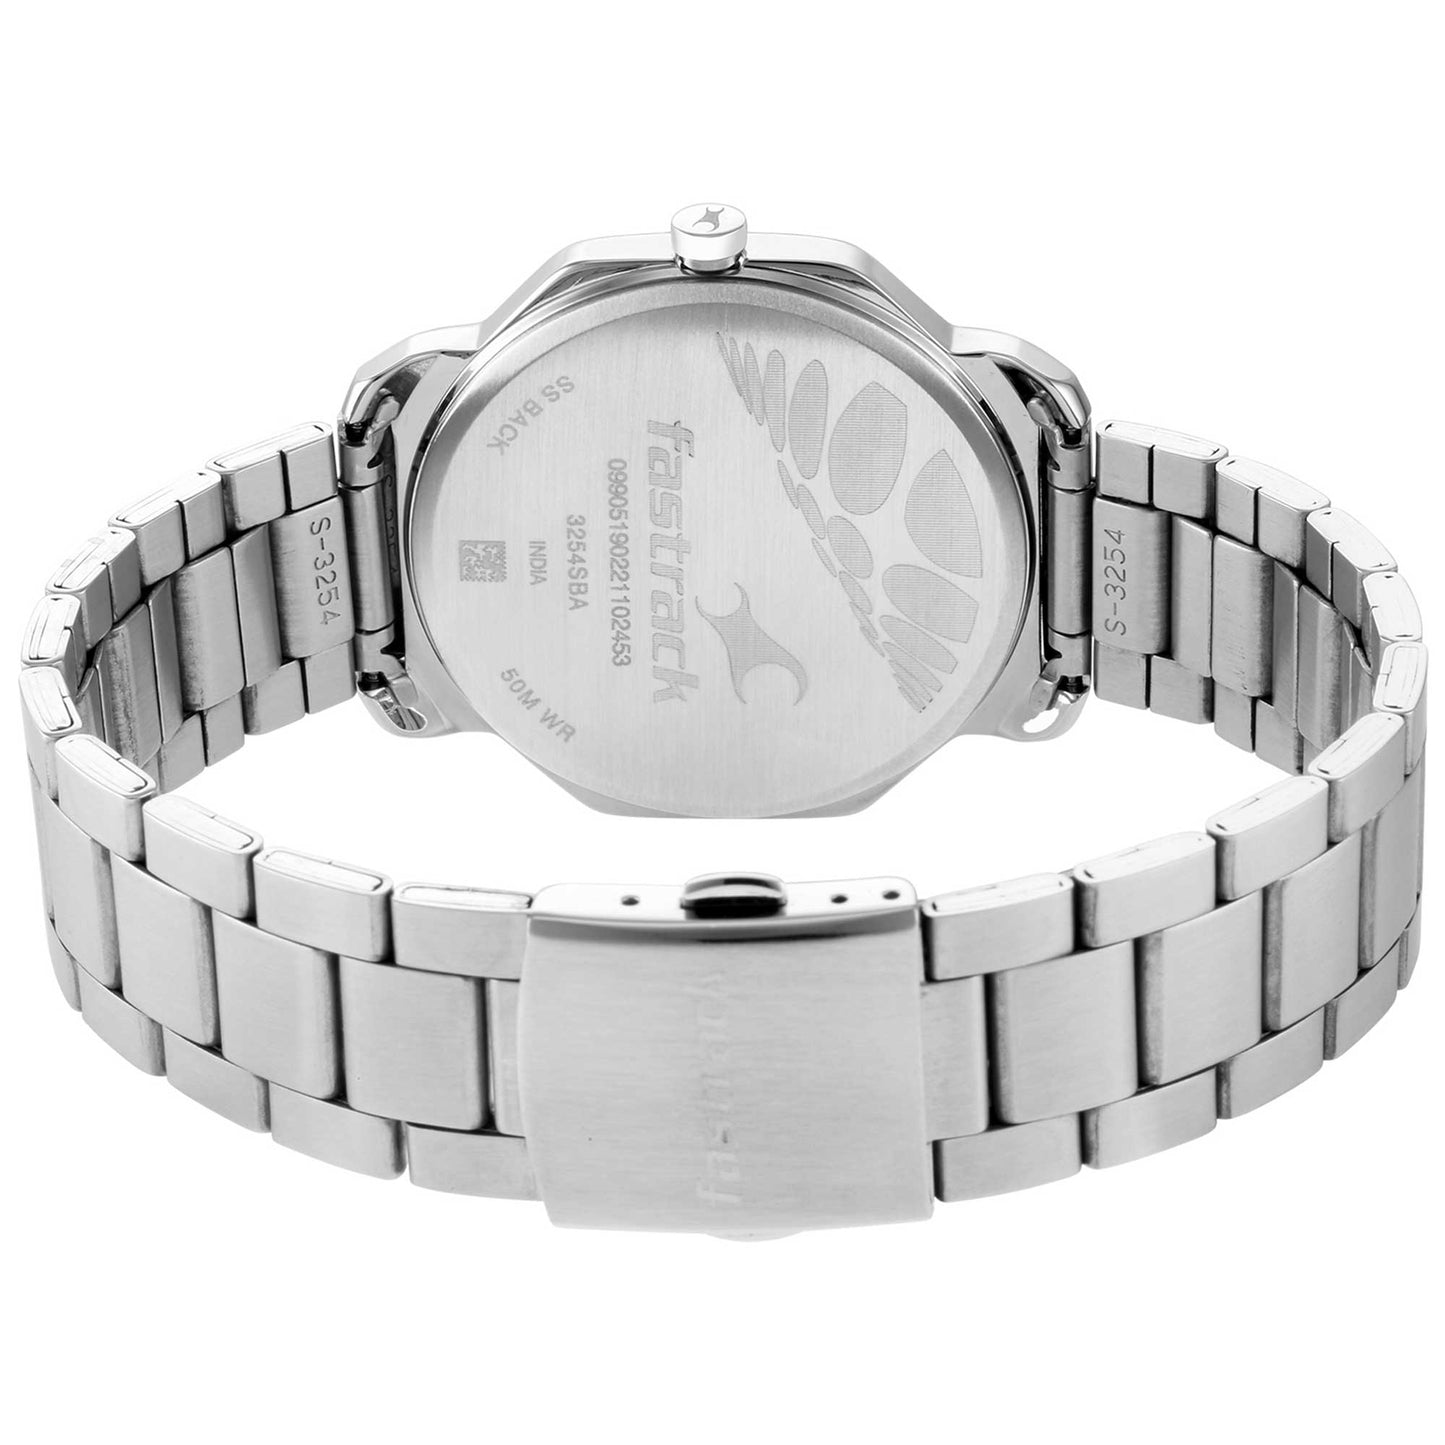 Fastrack Stunners Quartz Analog Silver Dial Metal Strap Watch for Guys